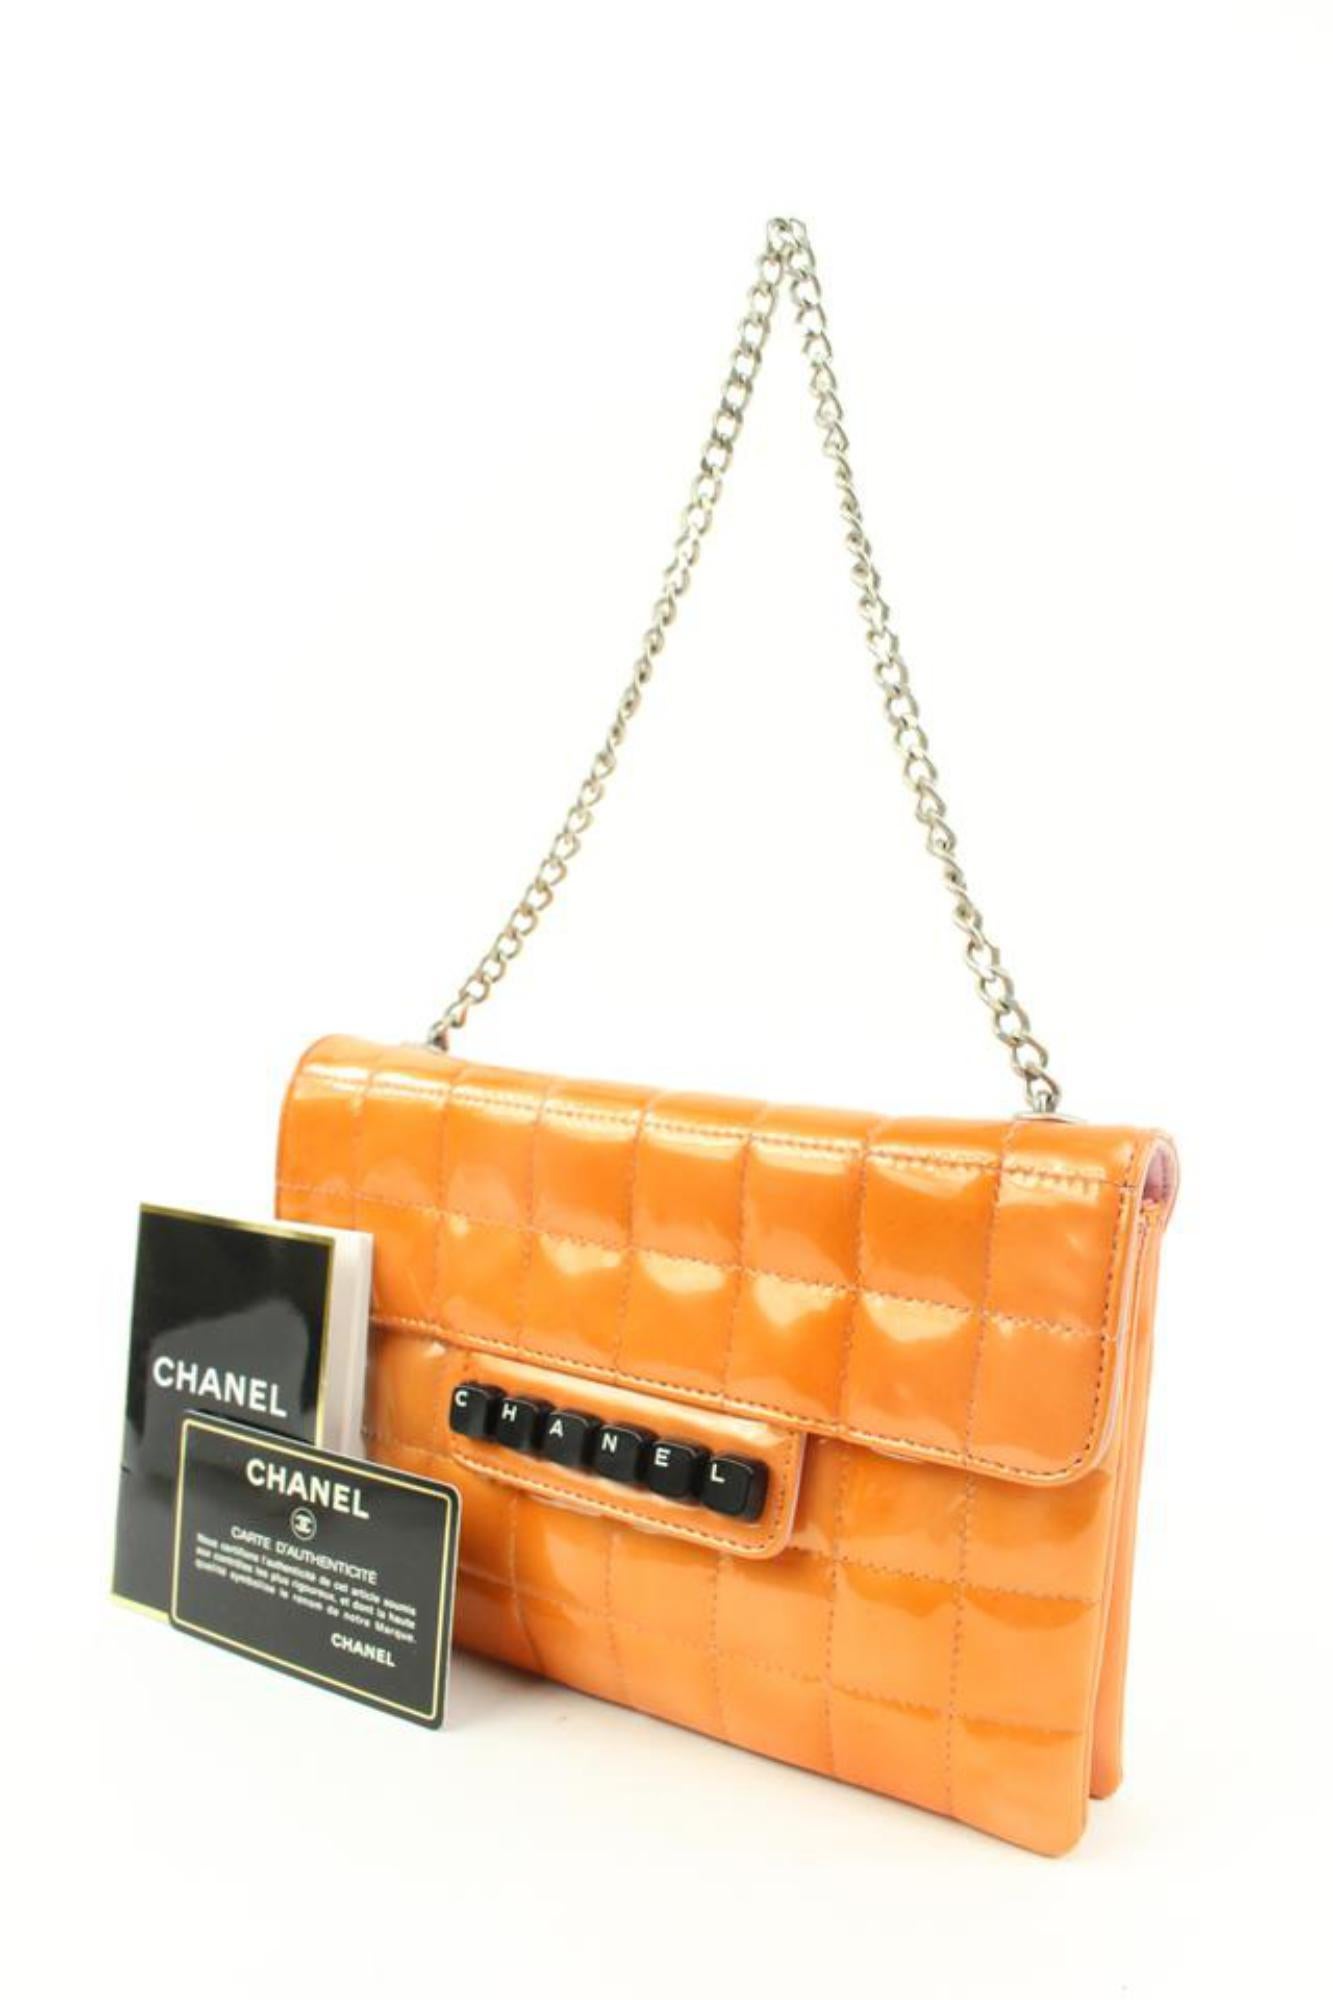 Chanel Orange Chocolate Bar Quilted Keyboard Chain Bag s210ck51
Date Code/Serial Number: 6073954
Made In: France
Measurements: Length:  8